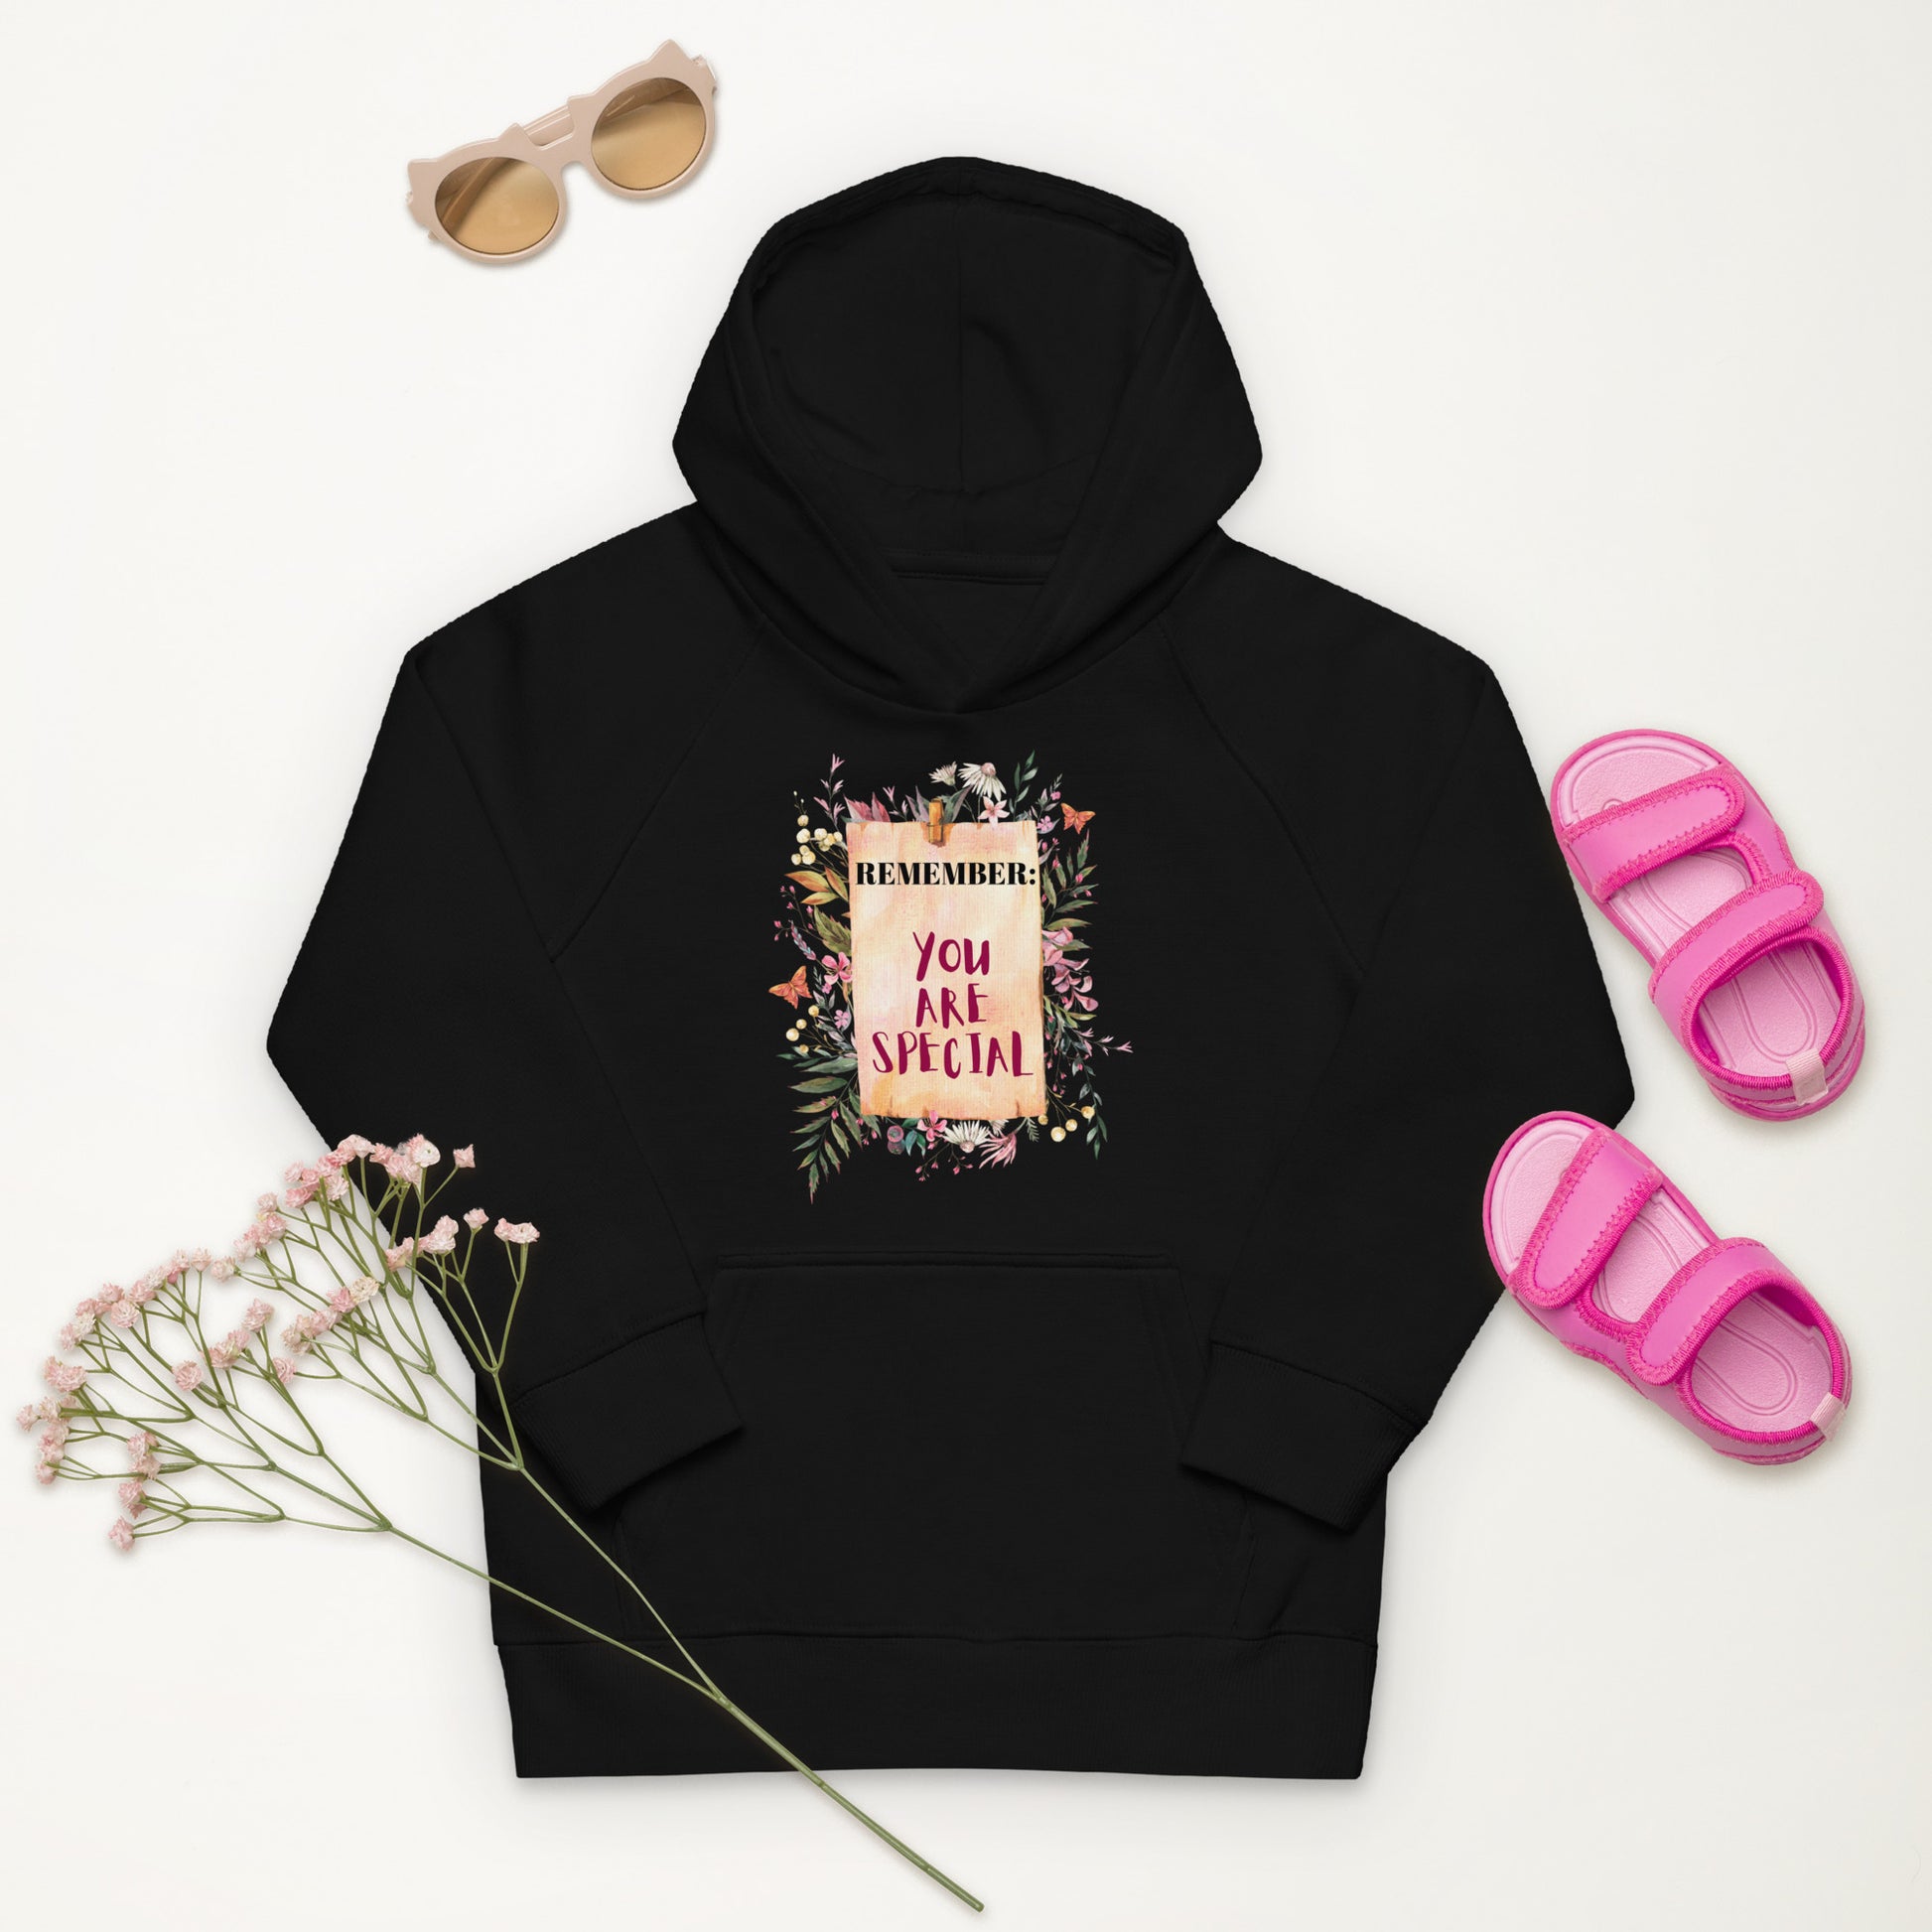 Inspirational Kids Pullover Organic Hoodie  featuring the powerful affirmation, "Remember, You Are Special." The vintage-inspired design, featuring a floral botanical reminder note, adds a touch of timeless elegance to their attire